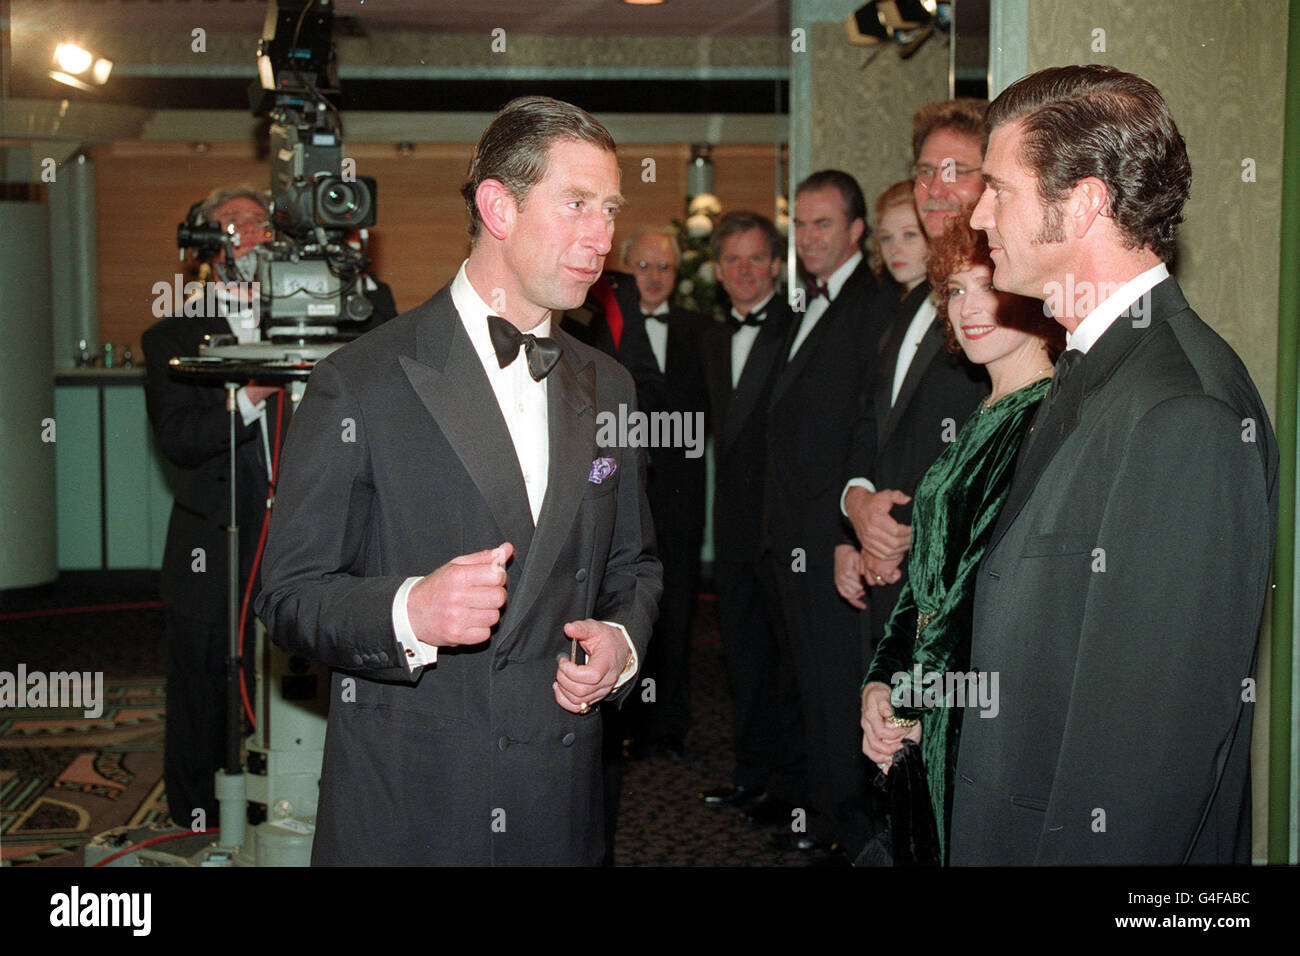 PA NEWS PHOTO 16/11/93  THE PRINCE OF WALES MEETS ACTOR AND FILM DIRECTOR MEL GIBSON BEFORE THE ROYAL FILM PERFORMANCE OF HIS MOVIE 'THE MAN WITHOUT A FACE' AT THE ODEON CINEMA IN LONDON'S LEICESTER SQUARE Stock Photo